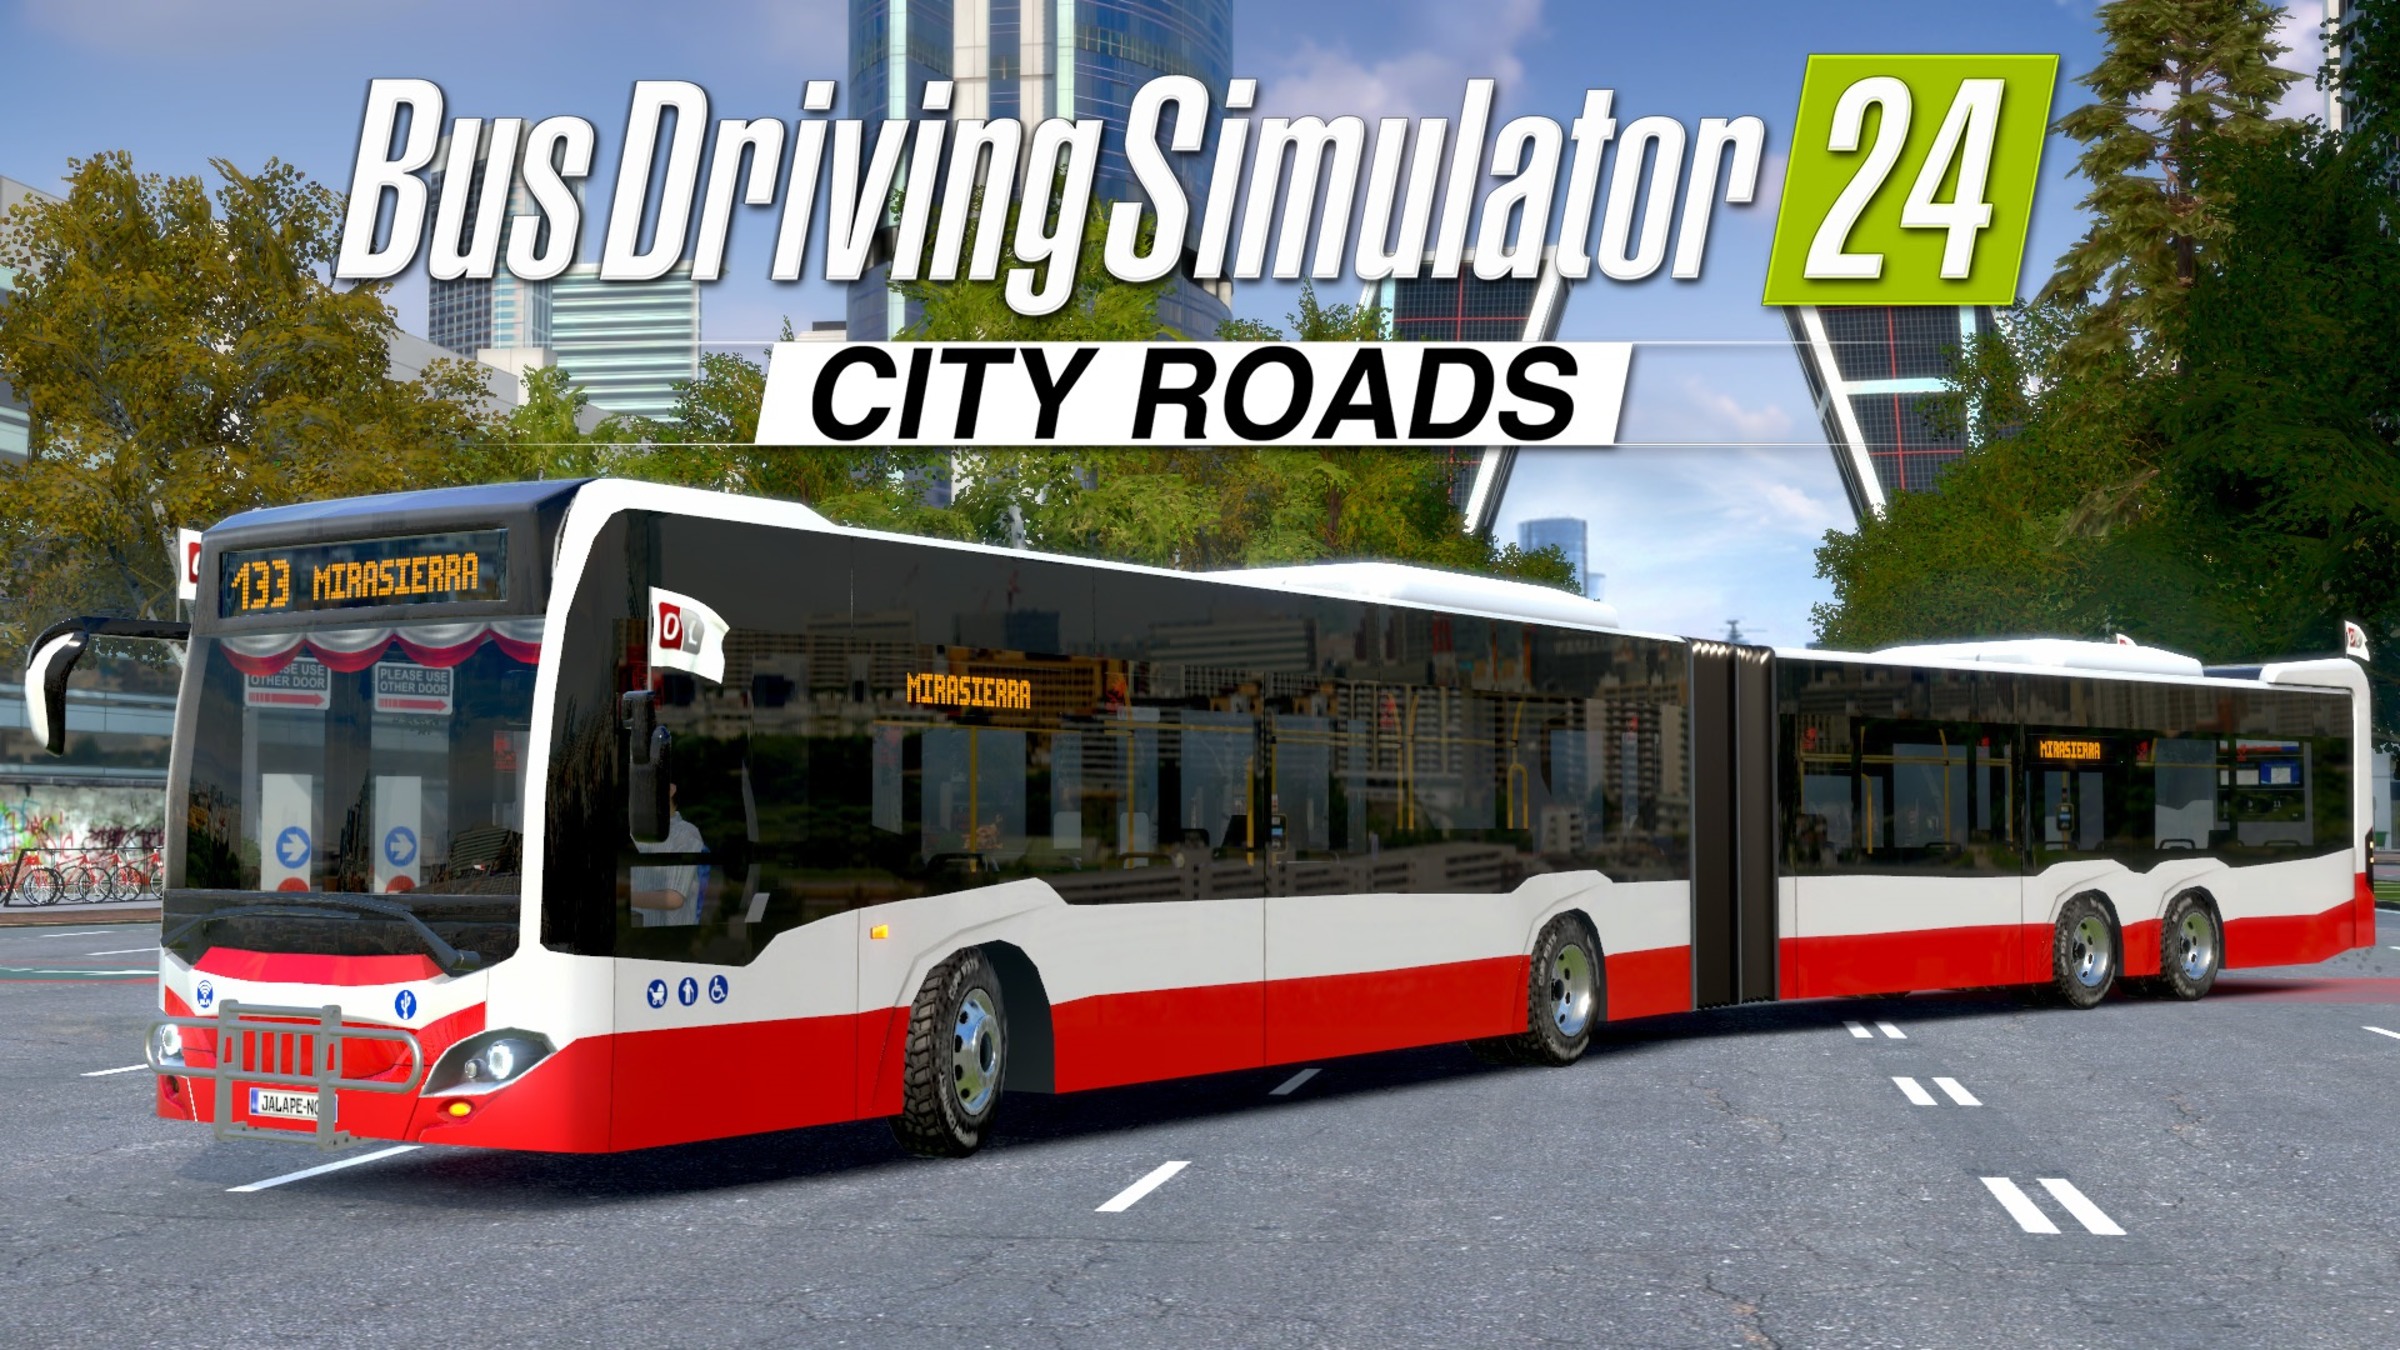 Bus Driving Simulator 24 - City Roads DLC Articulated Bus for 